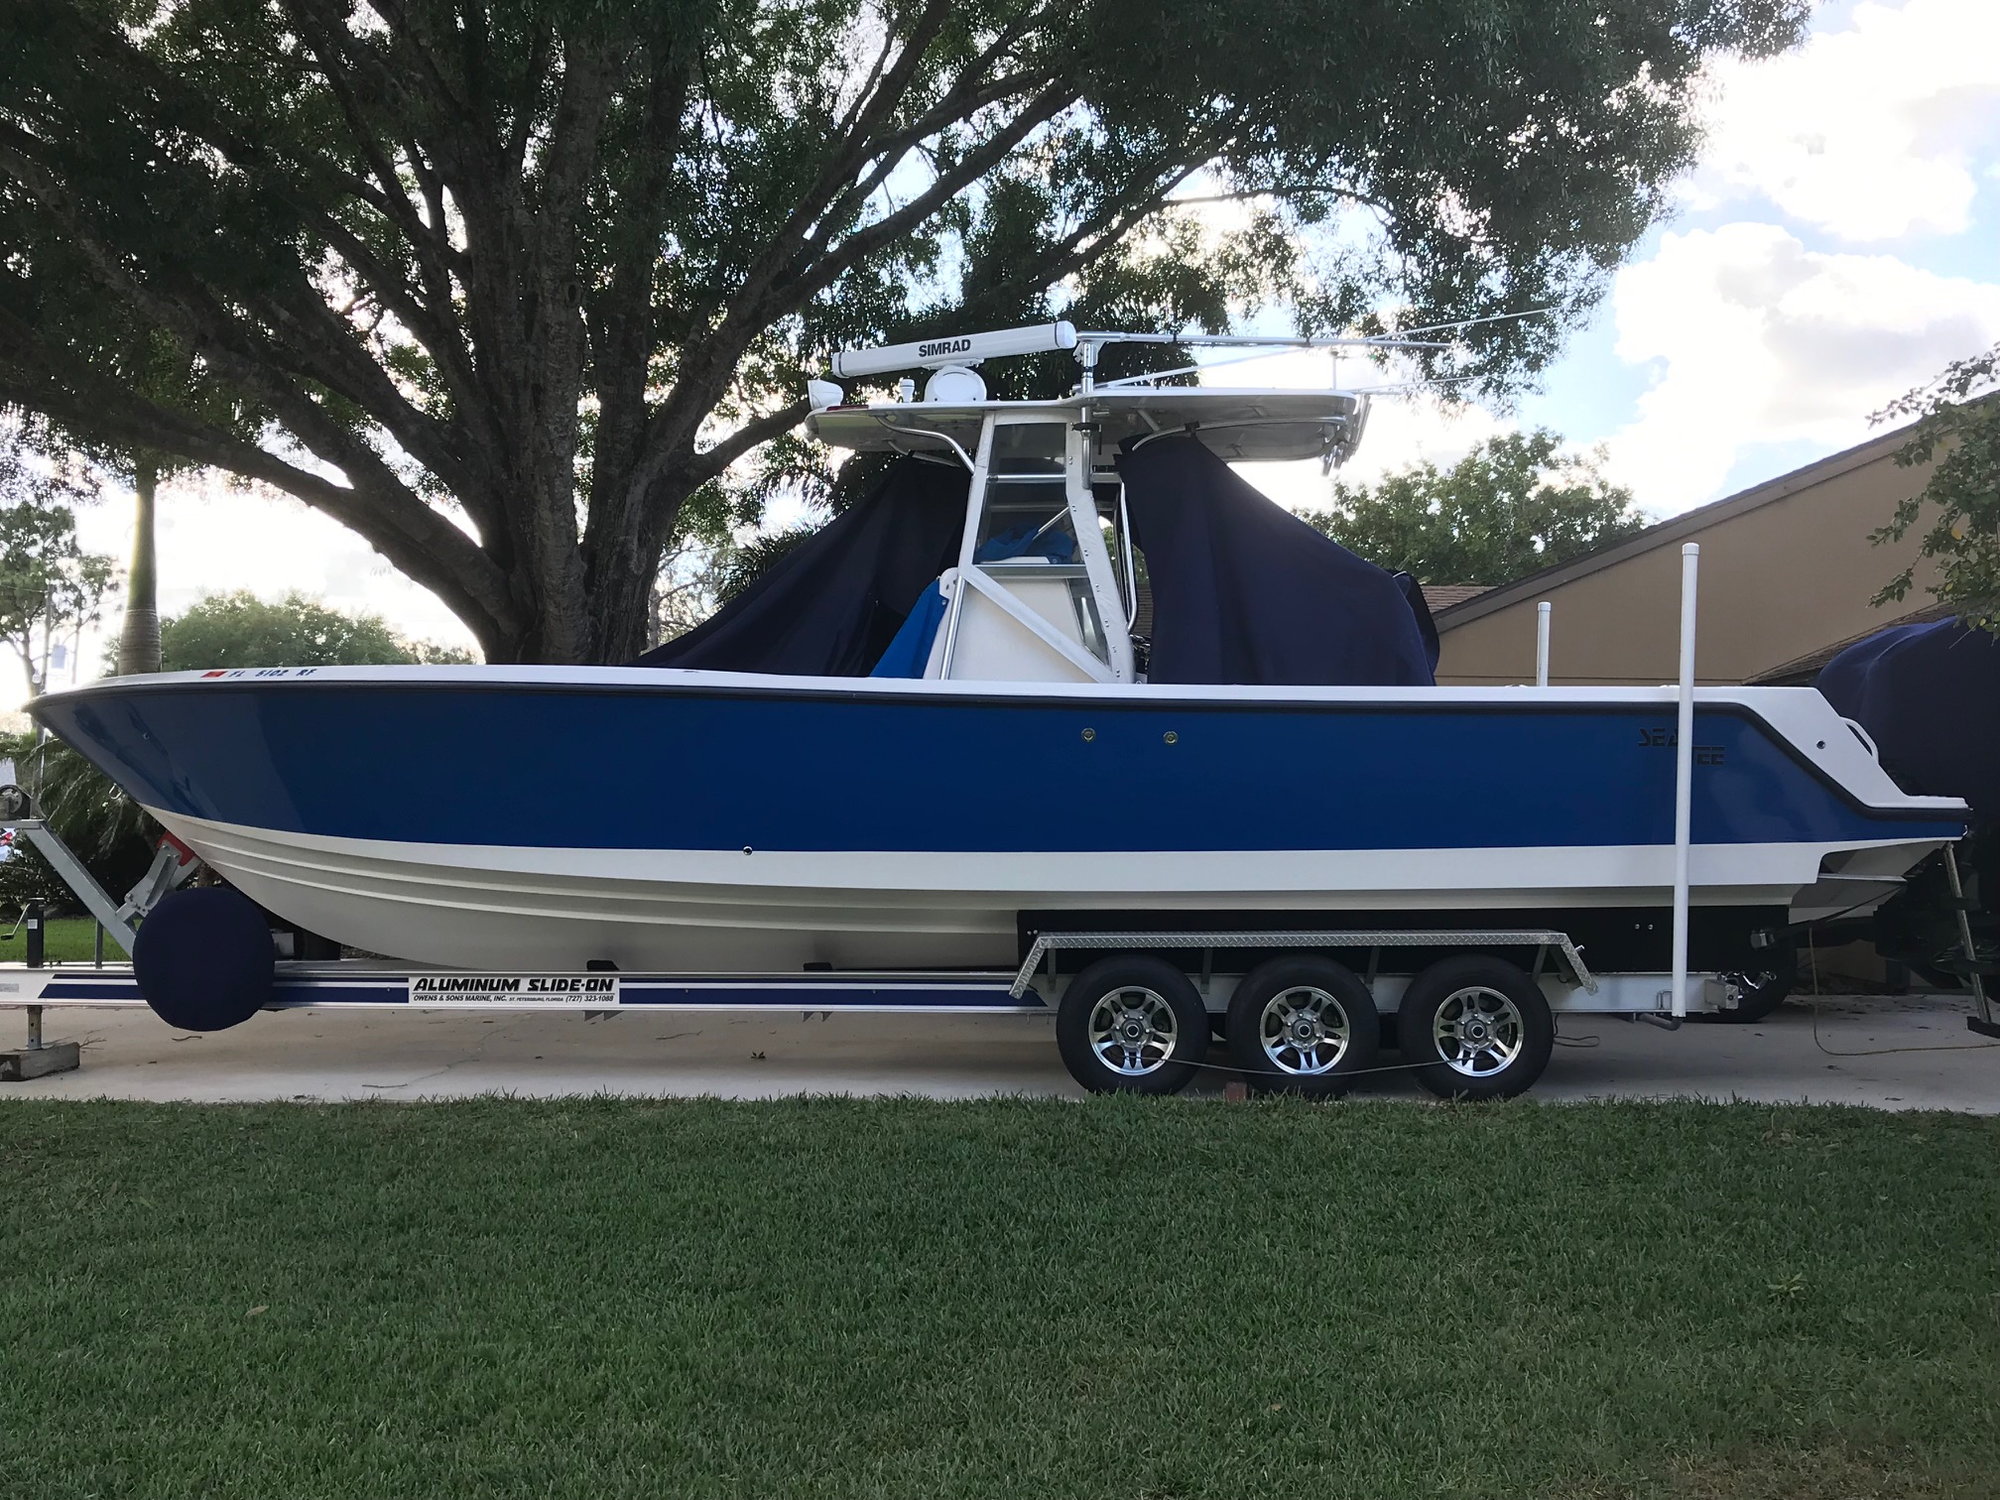 Bow tie down on trailer - The Hull Truth - Boating and Fishing Forum